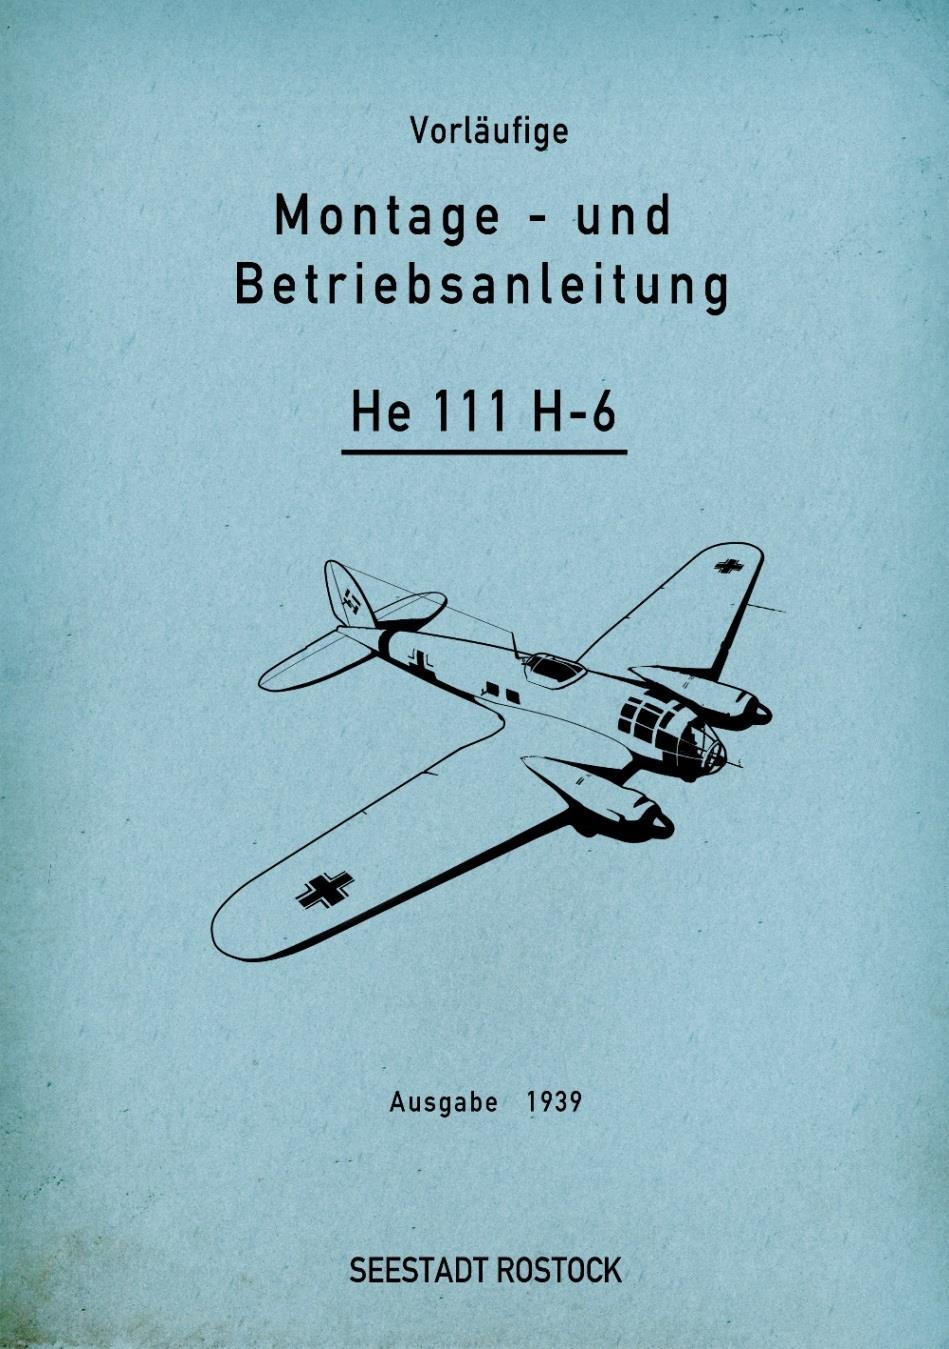 A.4 GERMAN BOMBERS Heinkel He-111 H-6 Of all types of He-111s produced before and during World War II, the He-111 H variant was built in more numbers and saw more combat than any other version built.